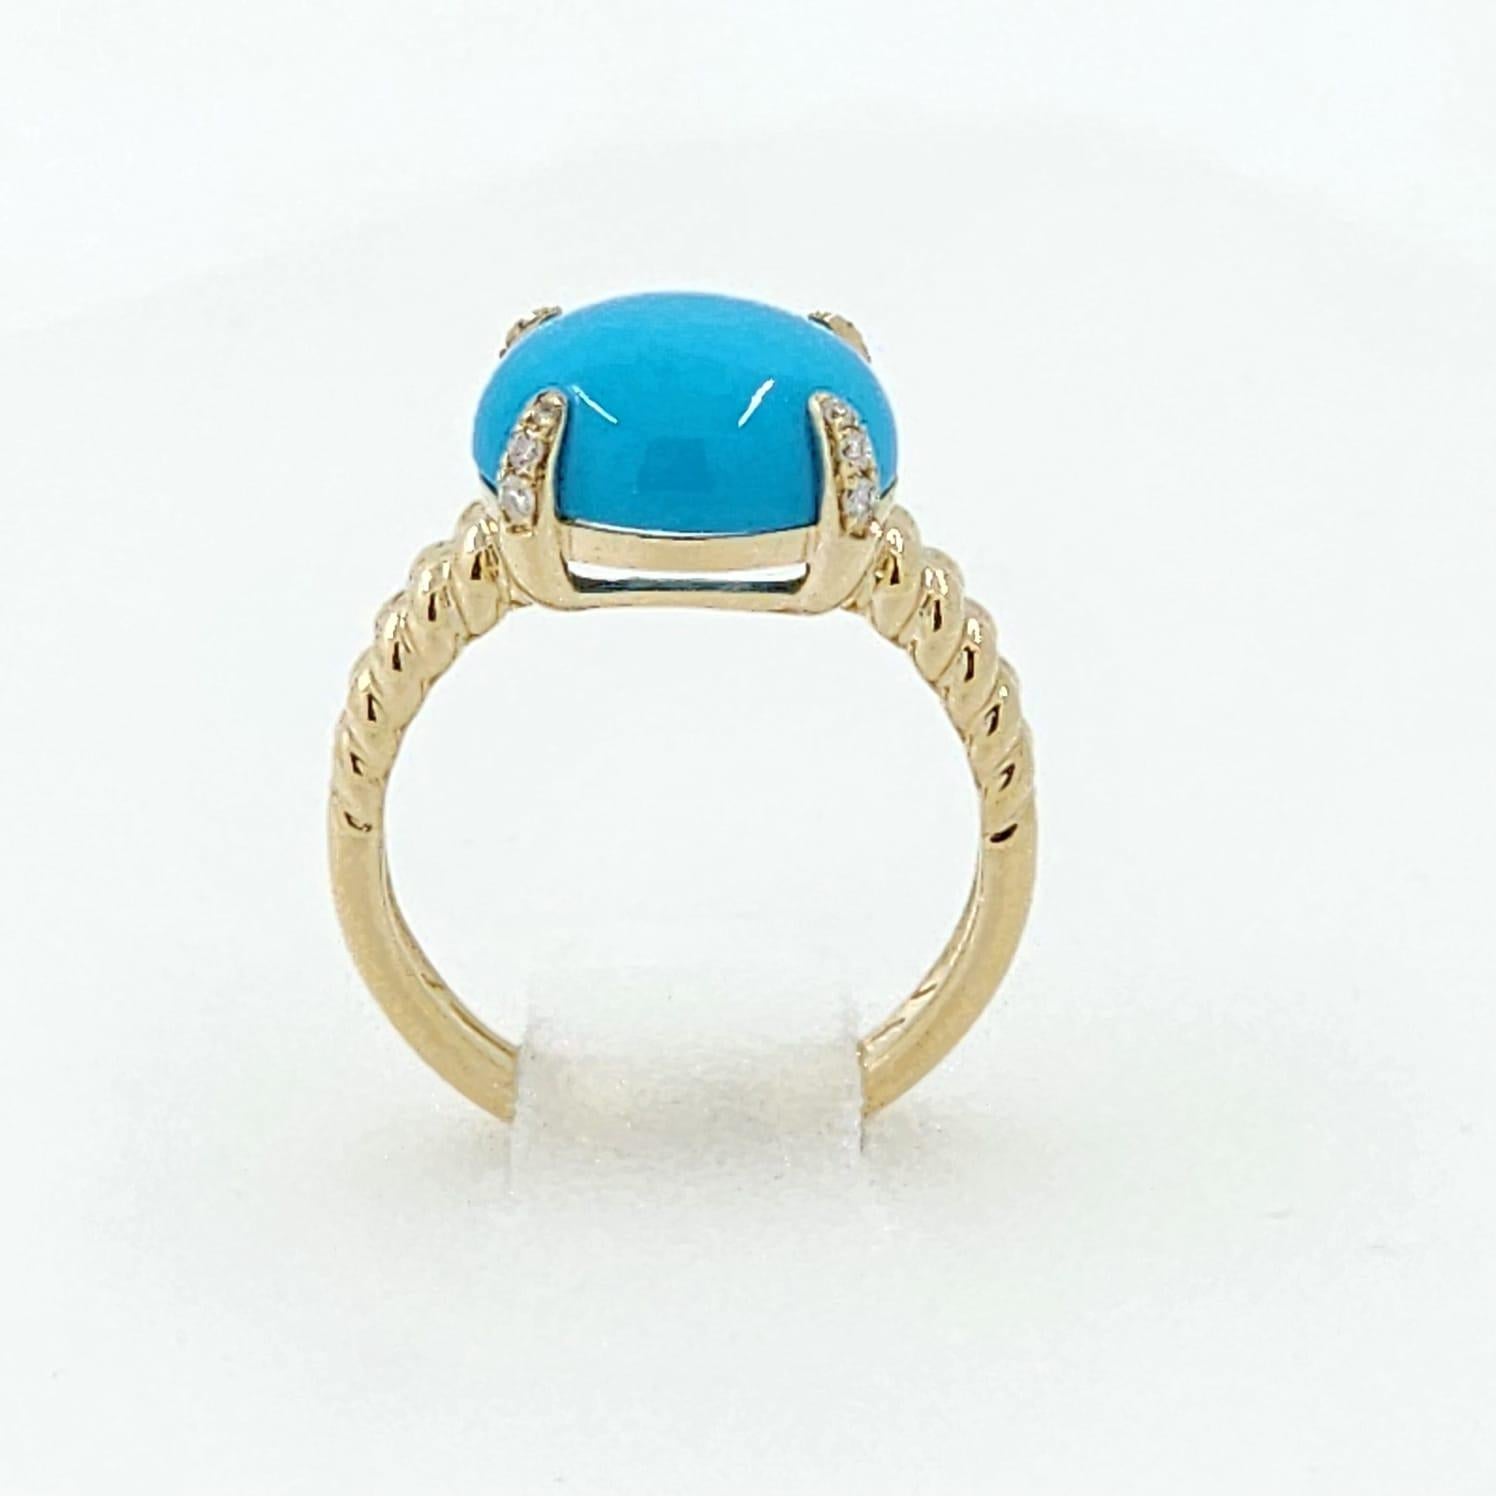 Cabochon Sleeping Beauty Turquoise Ring in 18K Yellow Gold For Sale 1